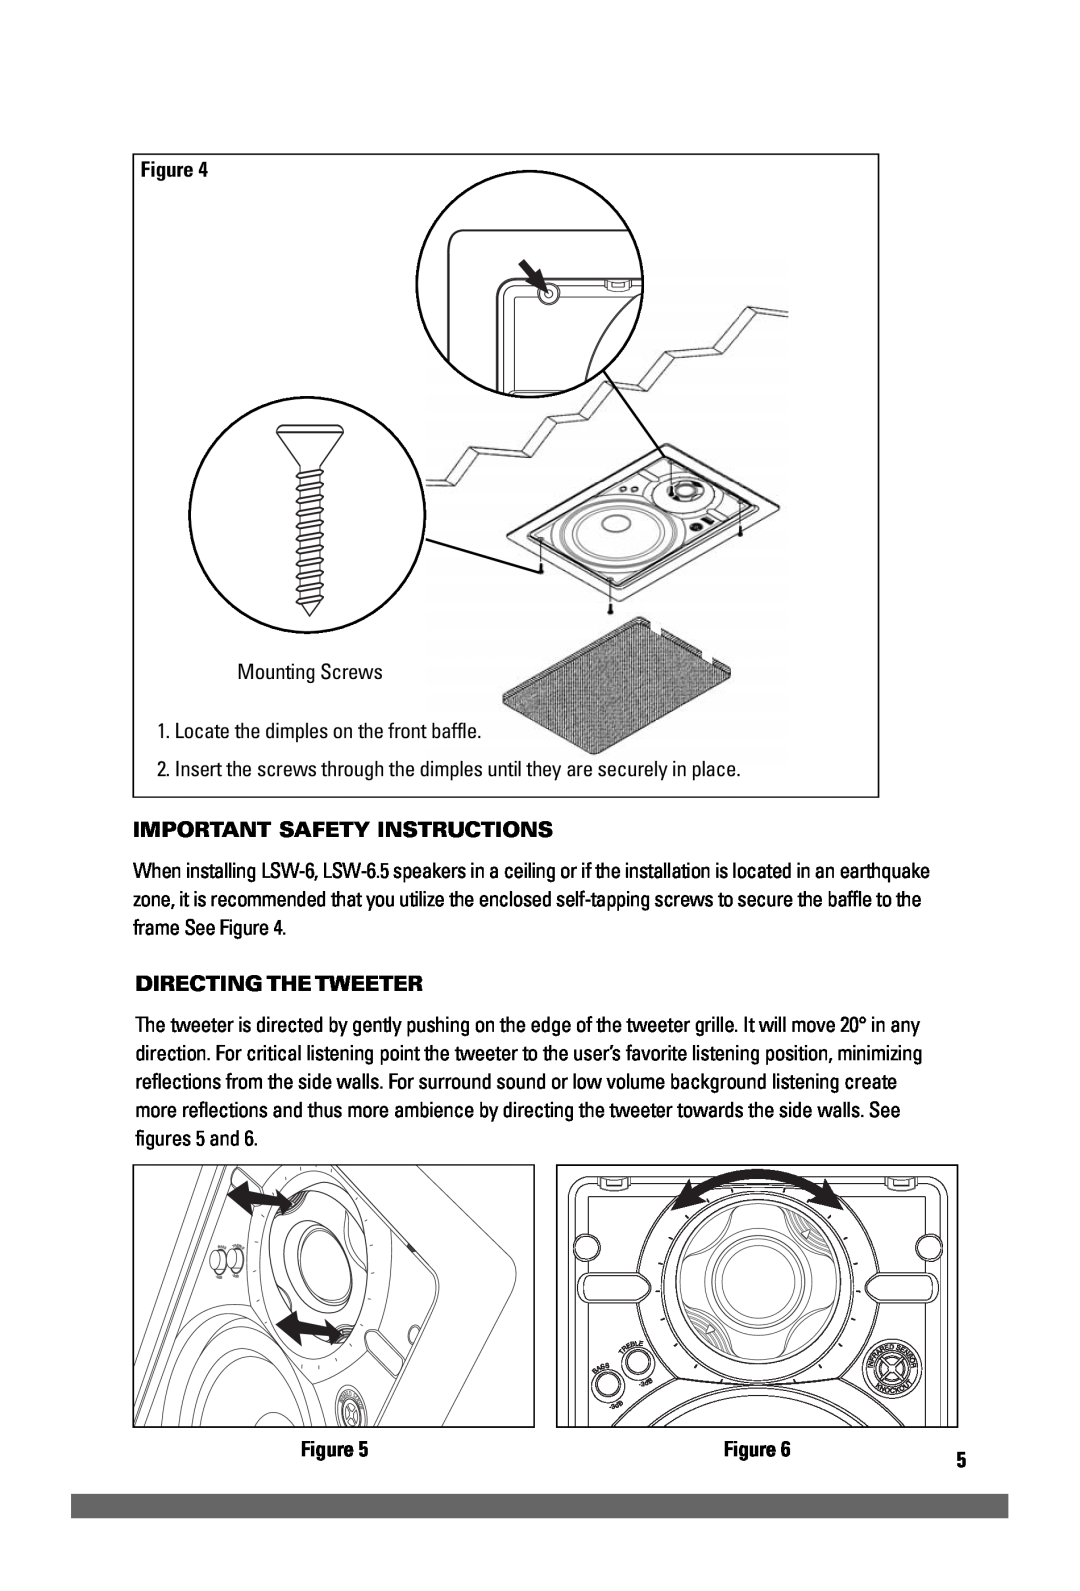 JobSite Systems LSW-6.5 manual Important Safety Instructions, Directing The Tweeter 